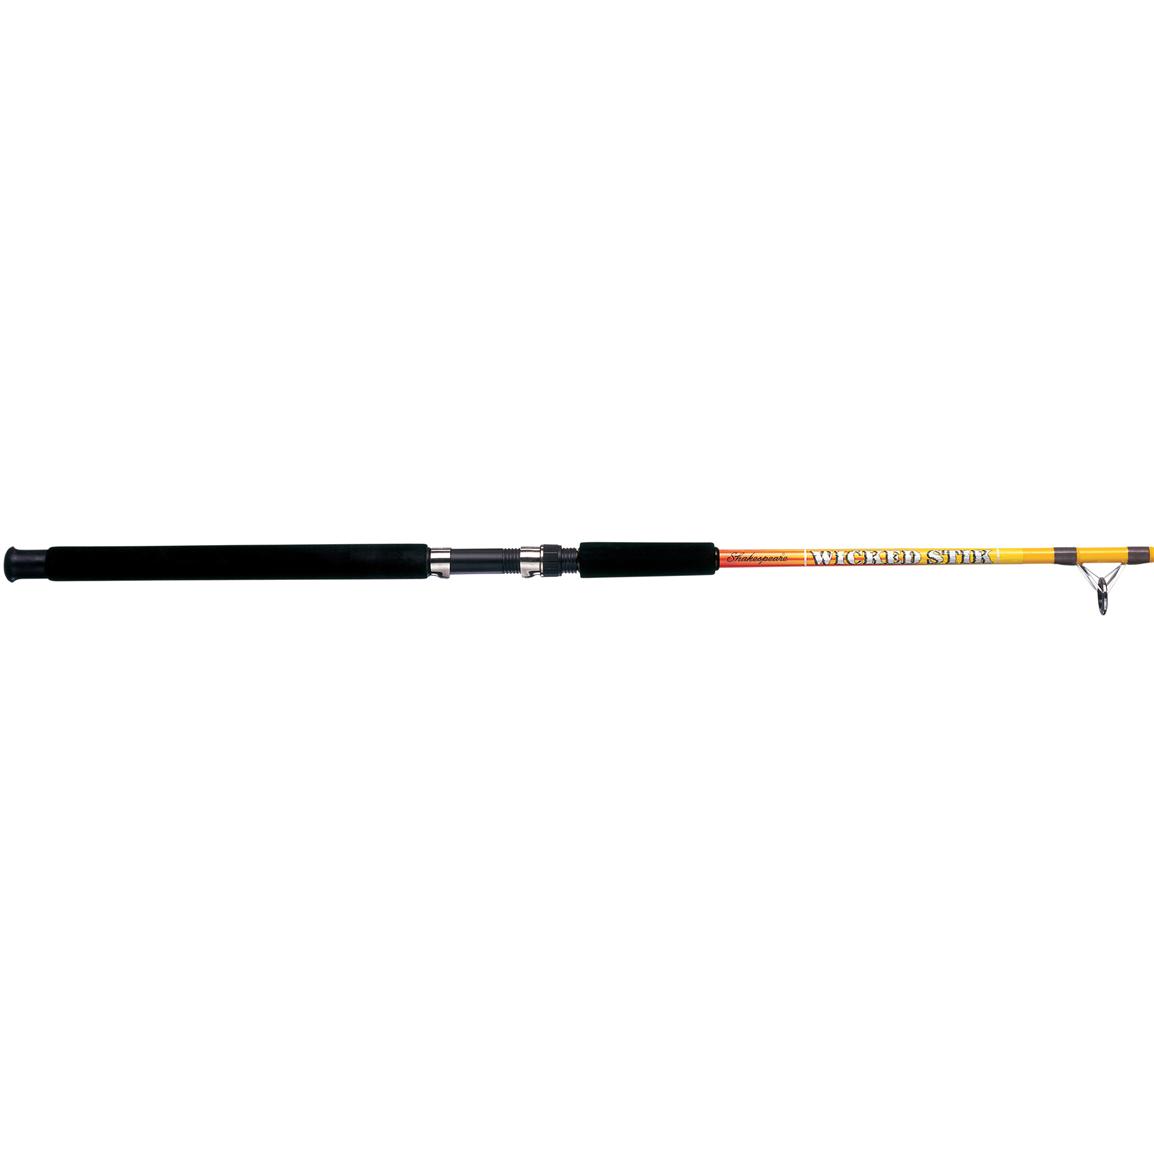 Shakespeare Wicked Stik 6 Big Water Spinning Rod 147373 Spinning 1589